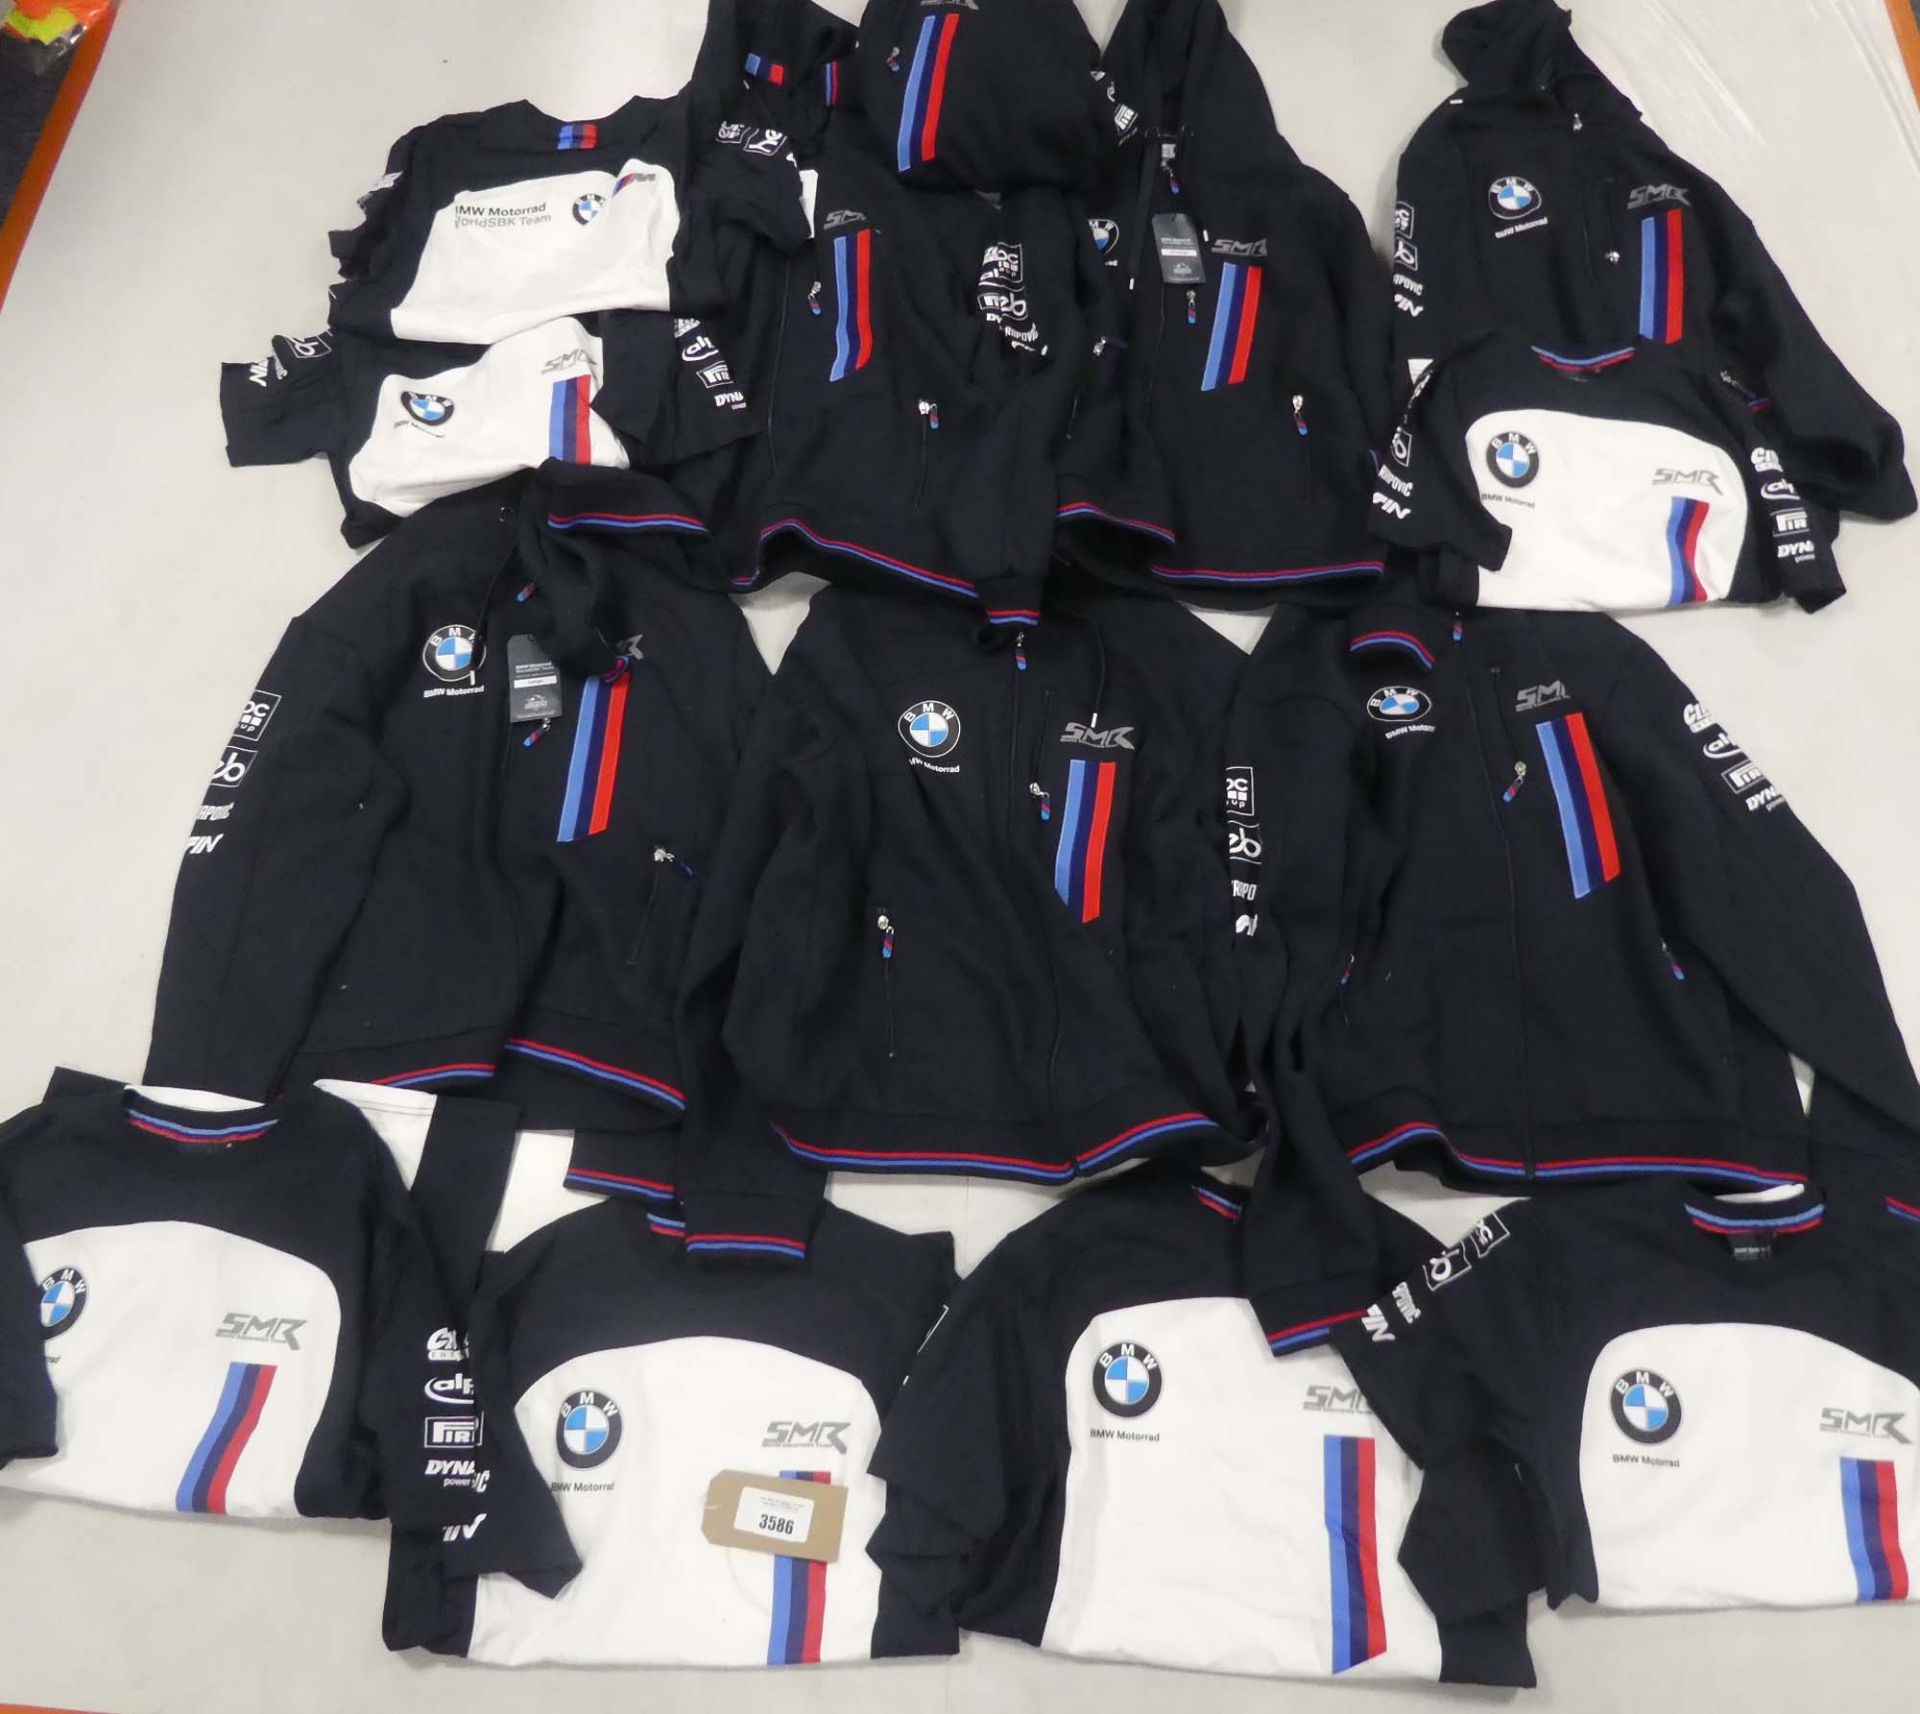 Bag containing 14 BMW Motorrad t shrts and hoodies